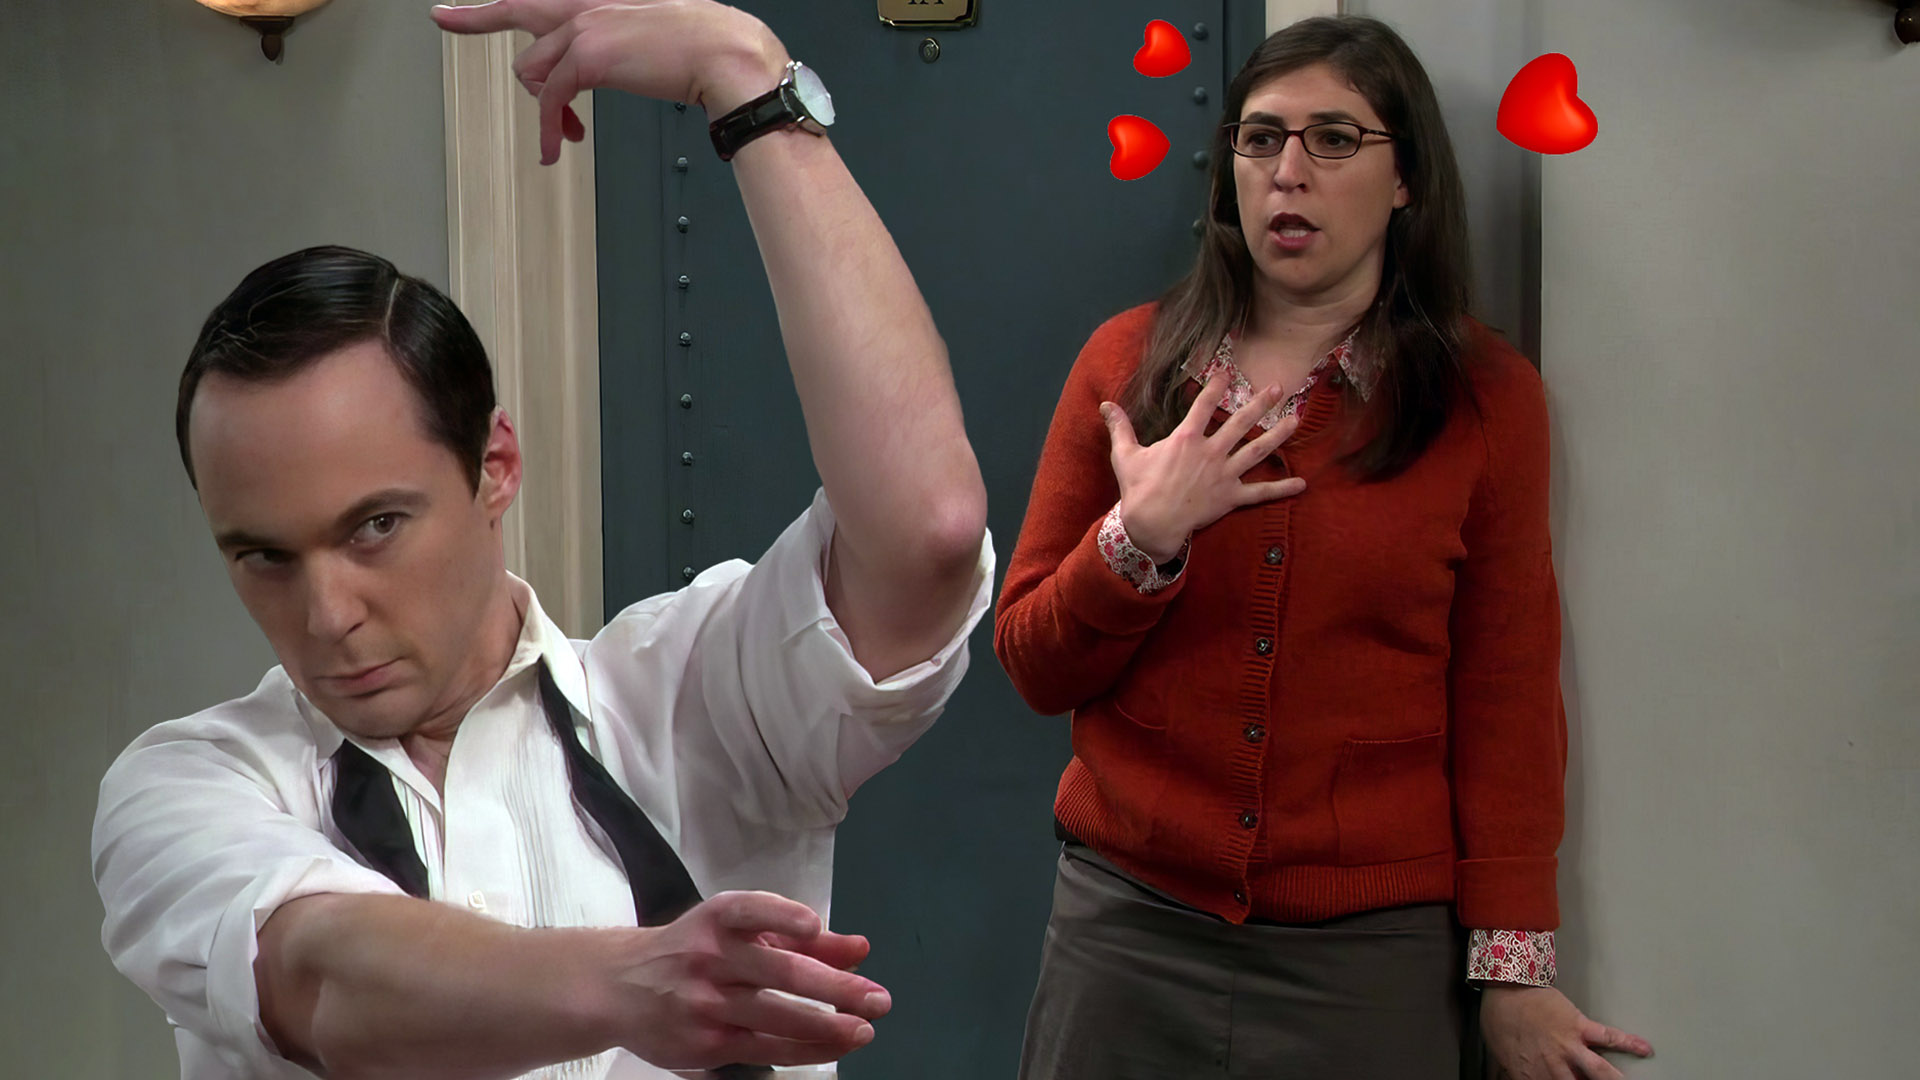 10 Big Bang Theory Relationships, Ranked from Toxic to #Soulmates